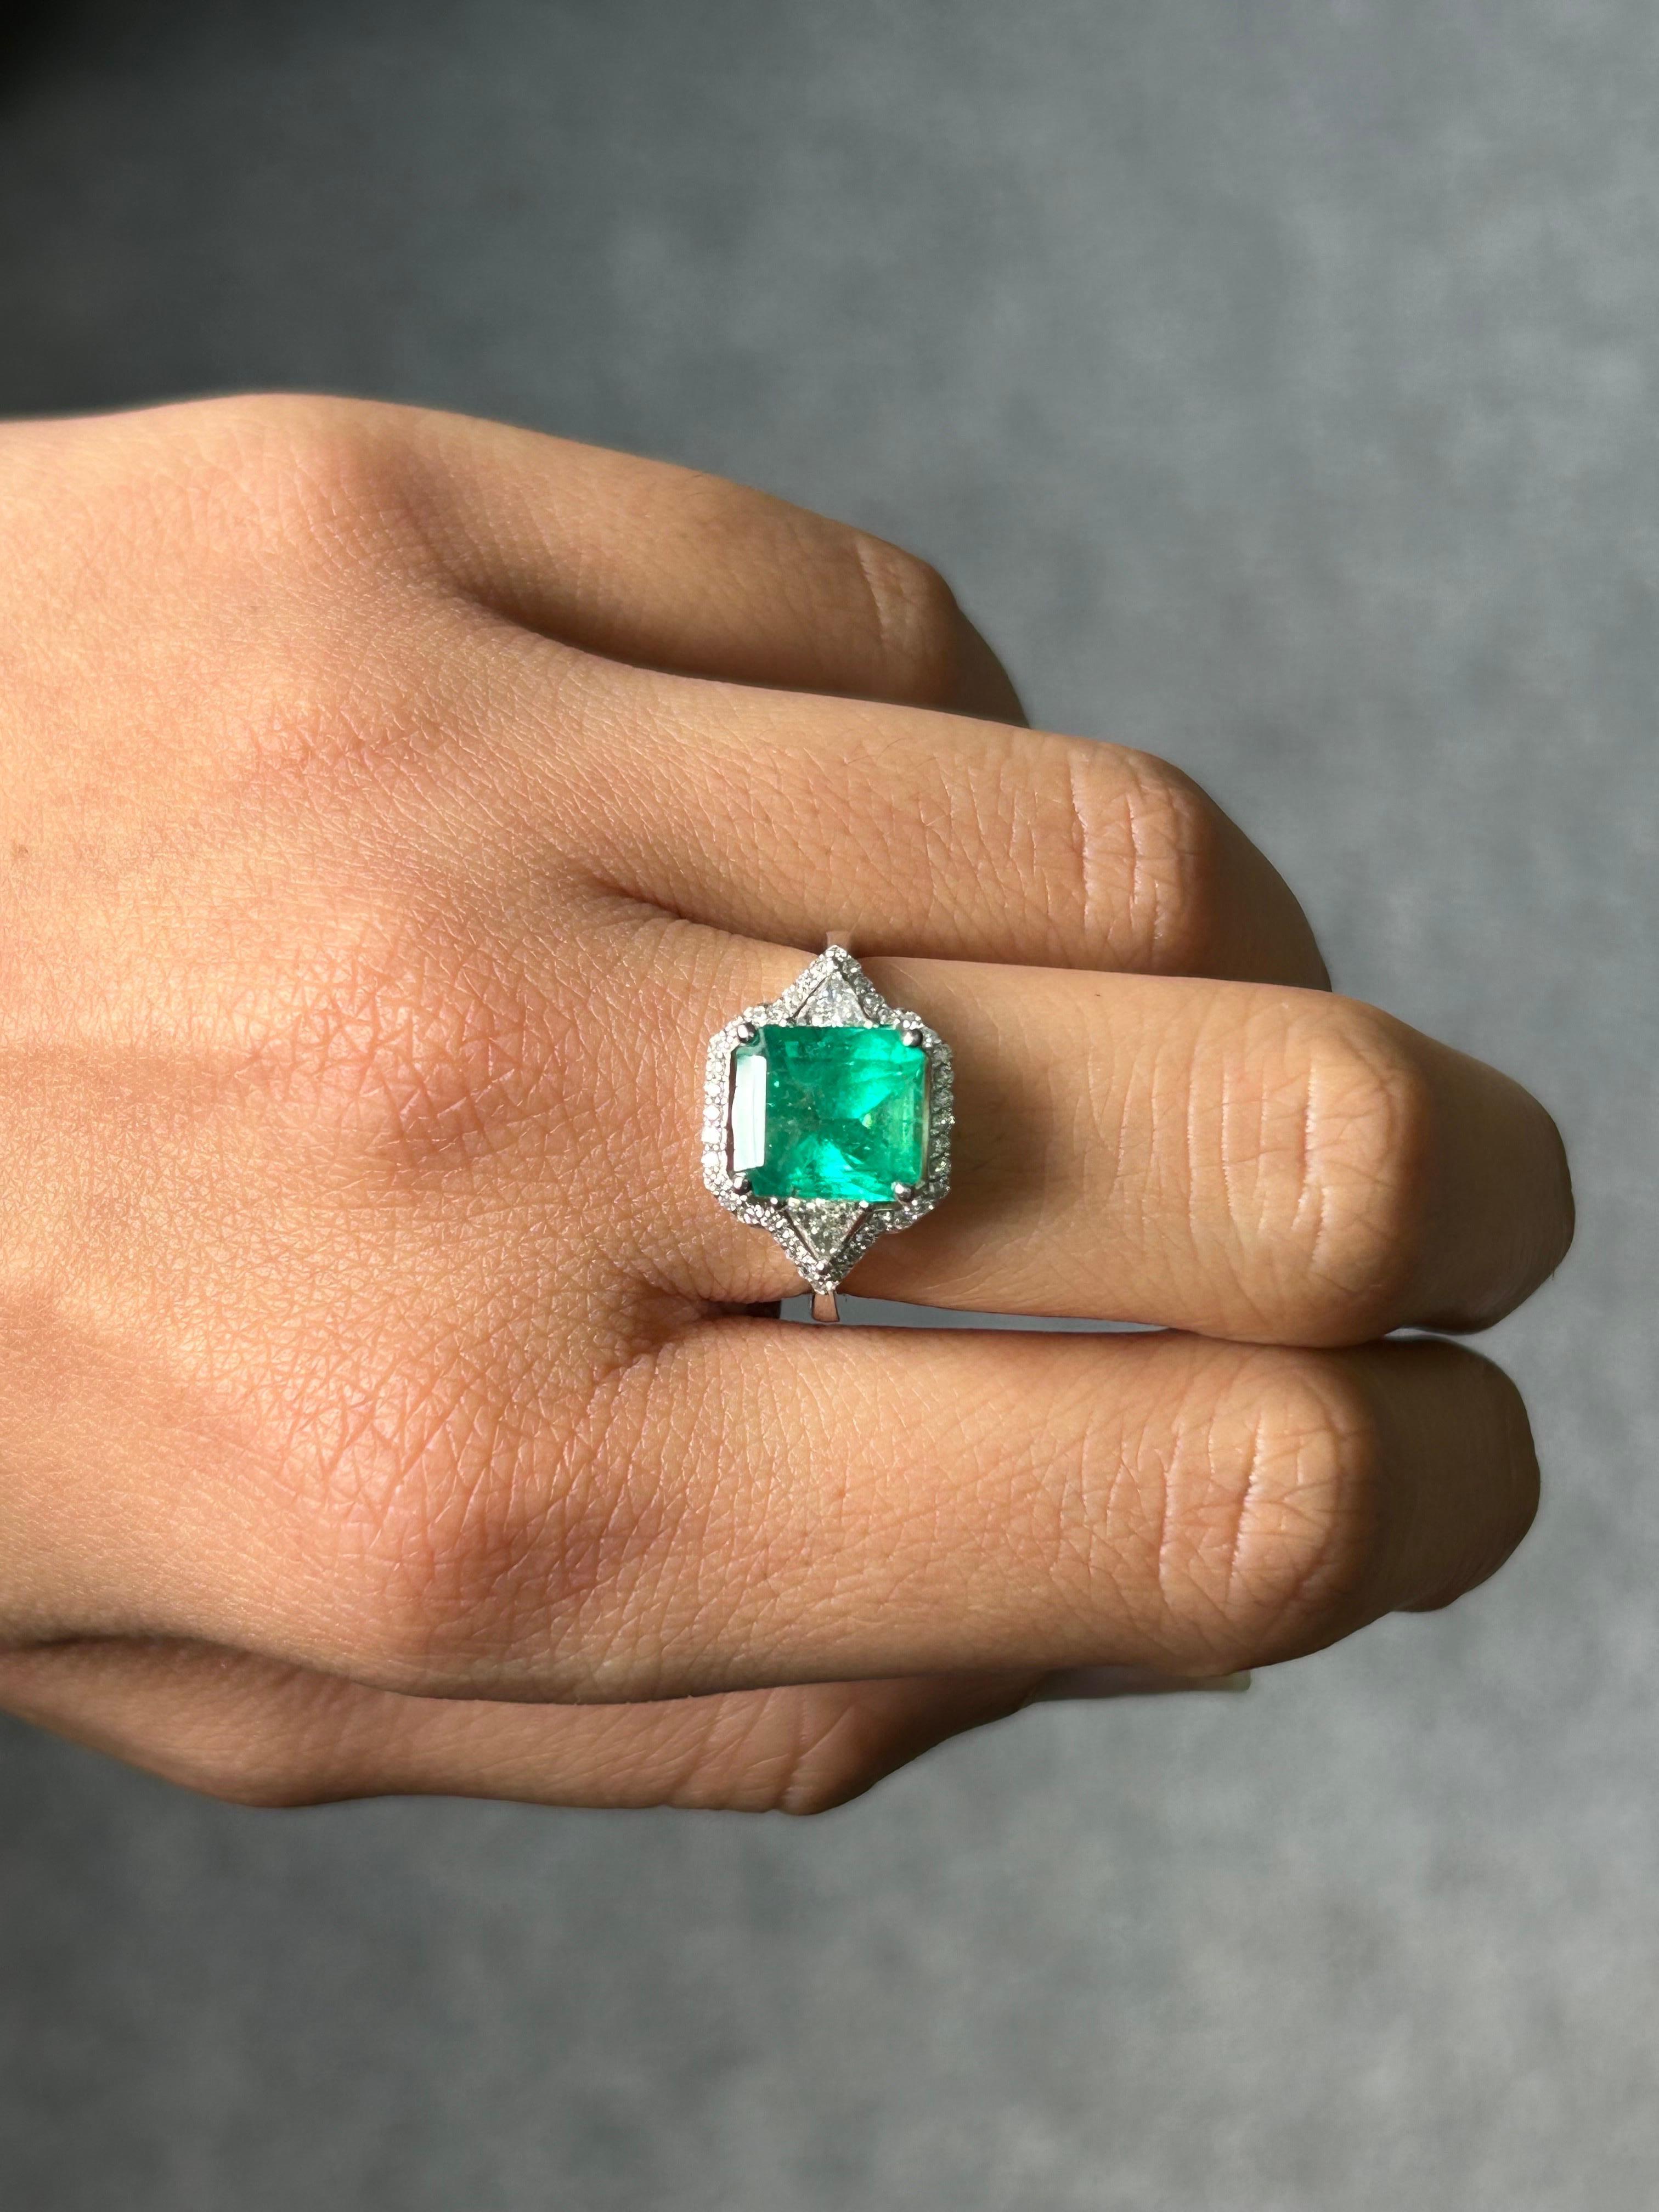 A certified vibrant, vivid green 2.36 carat emerald cut Colombian Emerald and 0.2 carat VS quality Trillion Diamond and 0.22 carat round Diamond halo three stone, engagement ring. The stones are set in 18K White Gold. Currently sized at US 7, can be